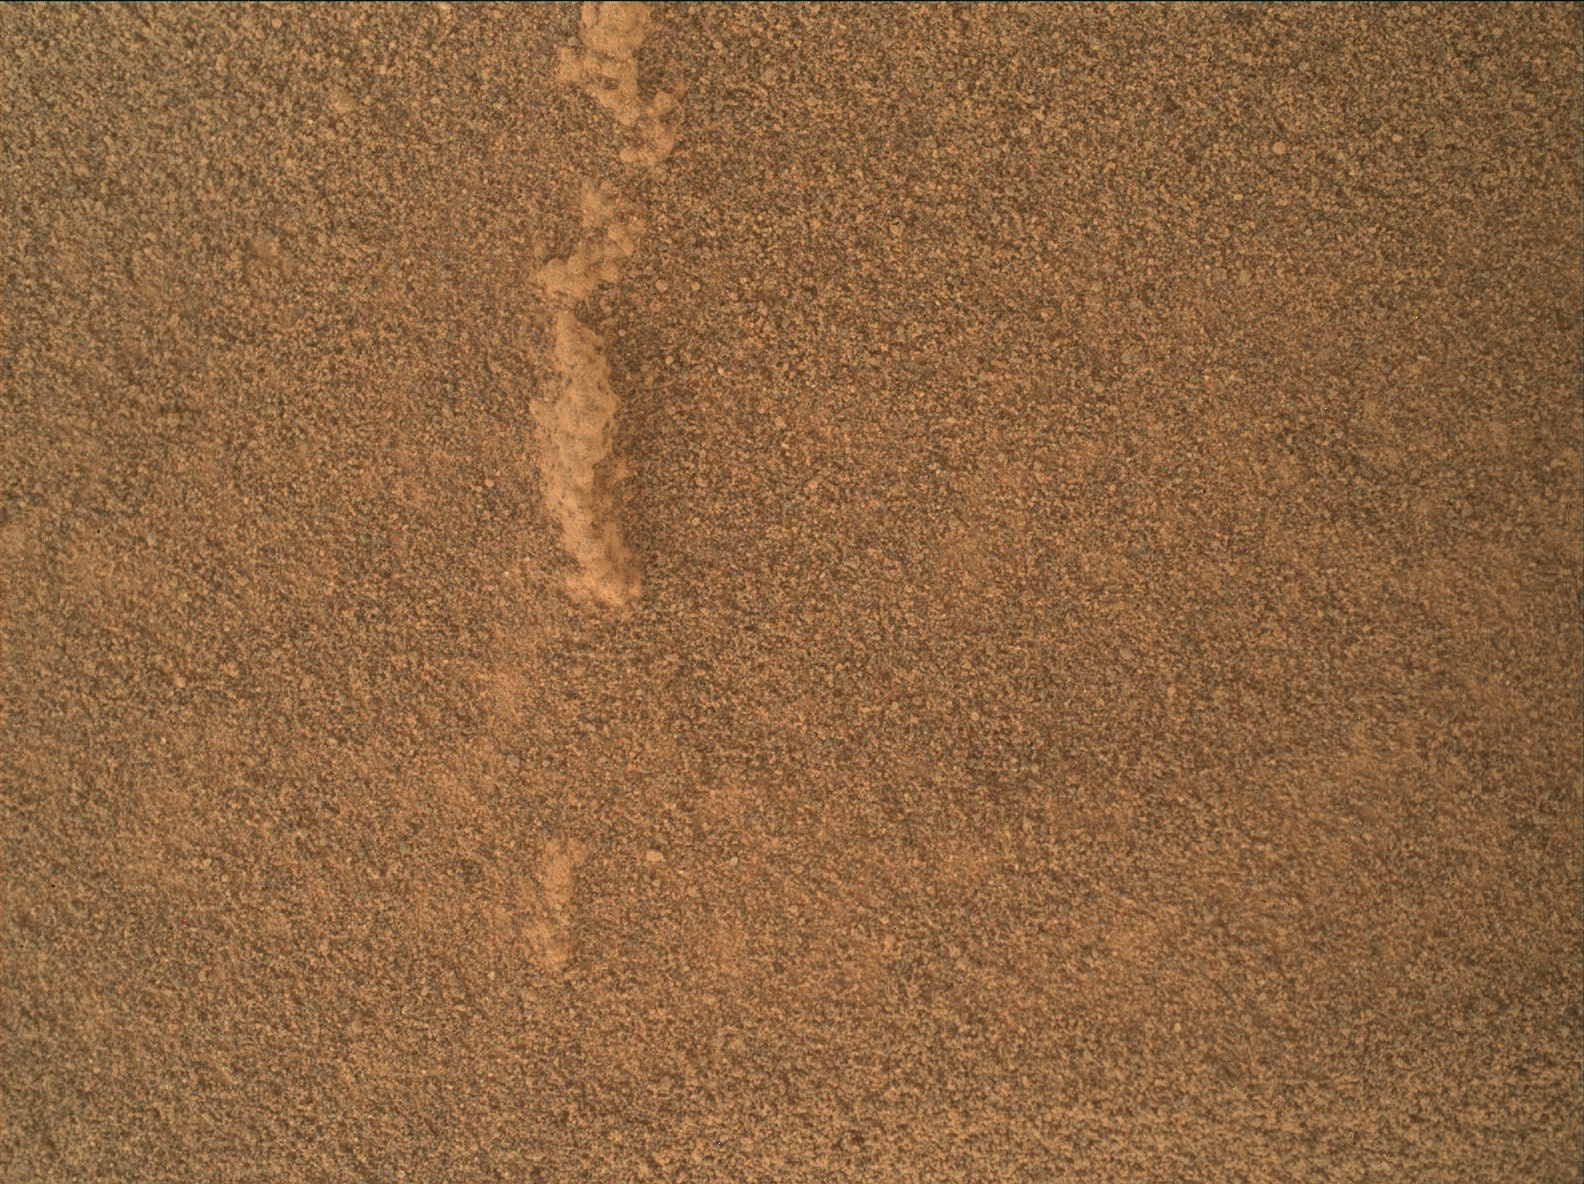 Nasa's Mars rover Curiosity acquired this image using its Mars Hand Lens Imager (MAHLI) on Sol 2707